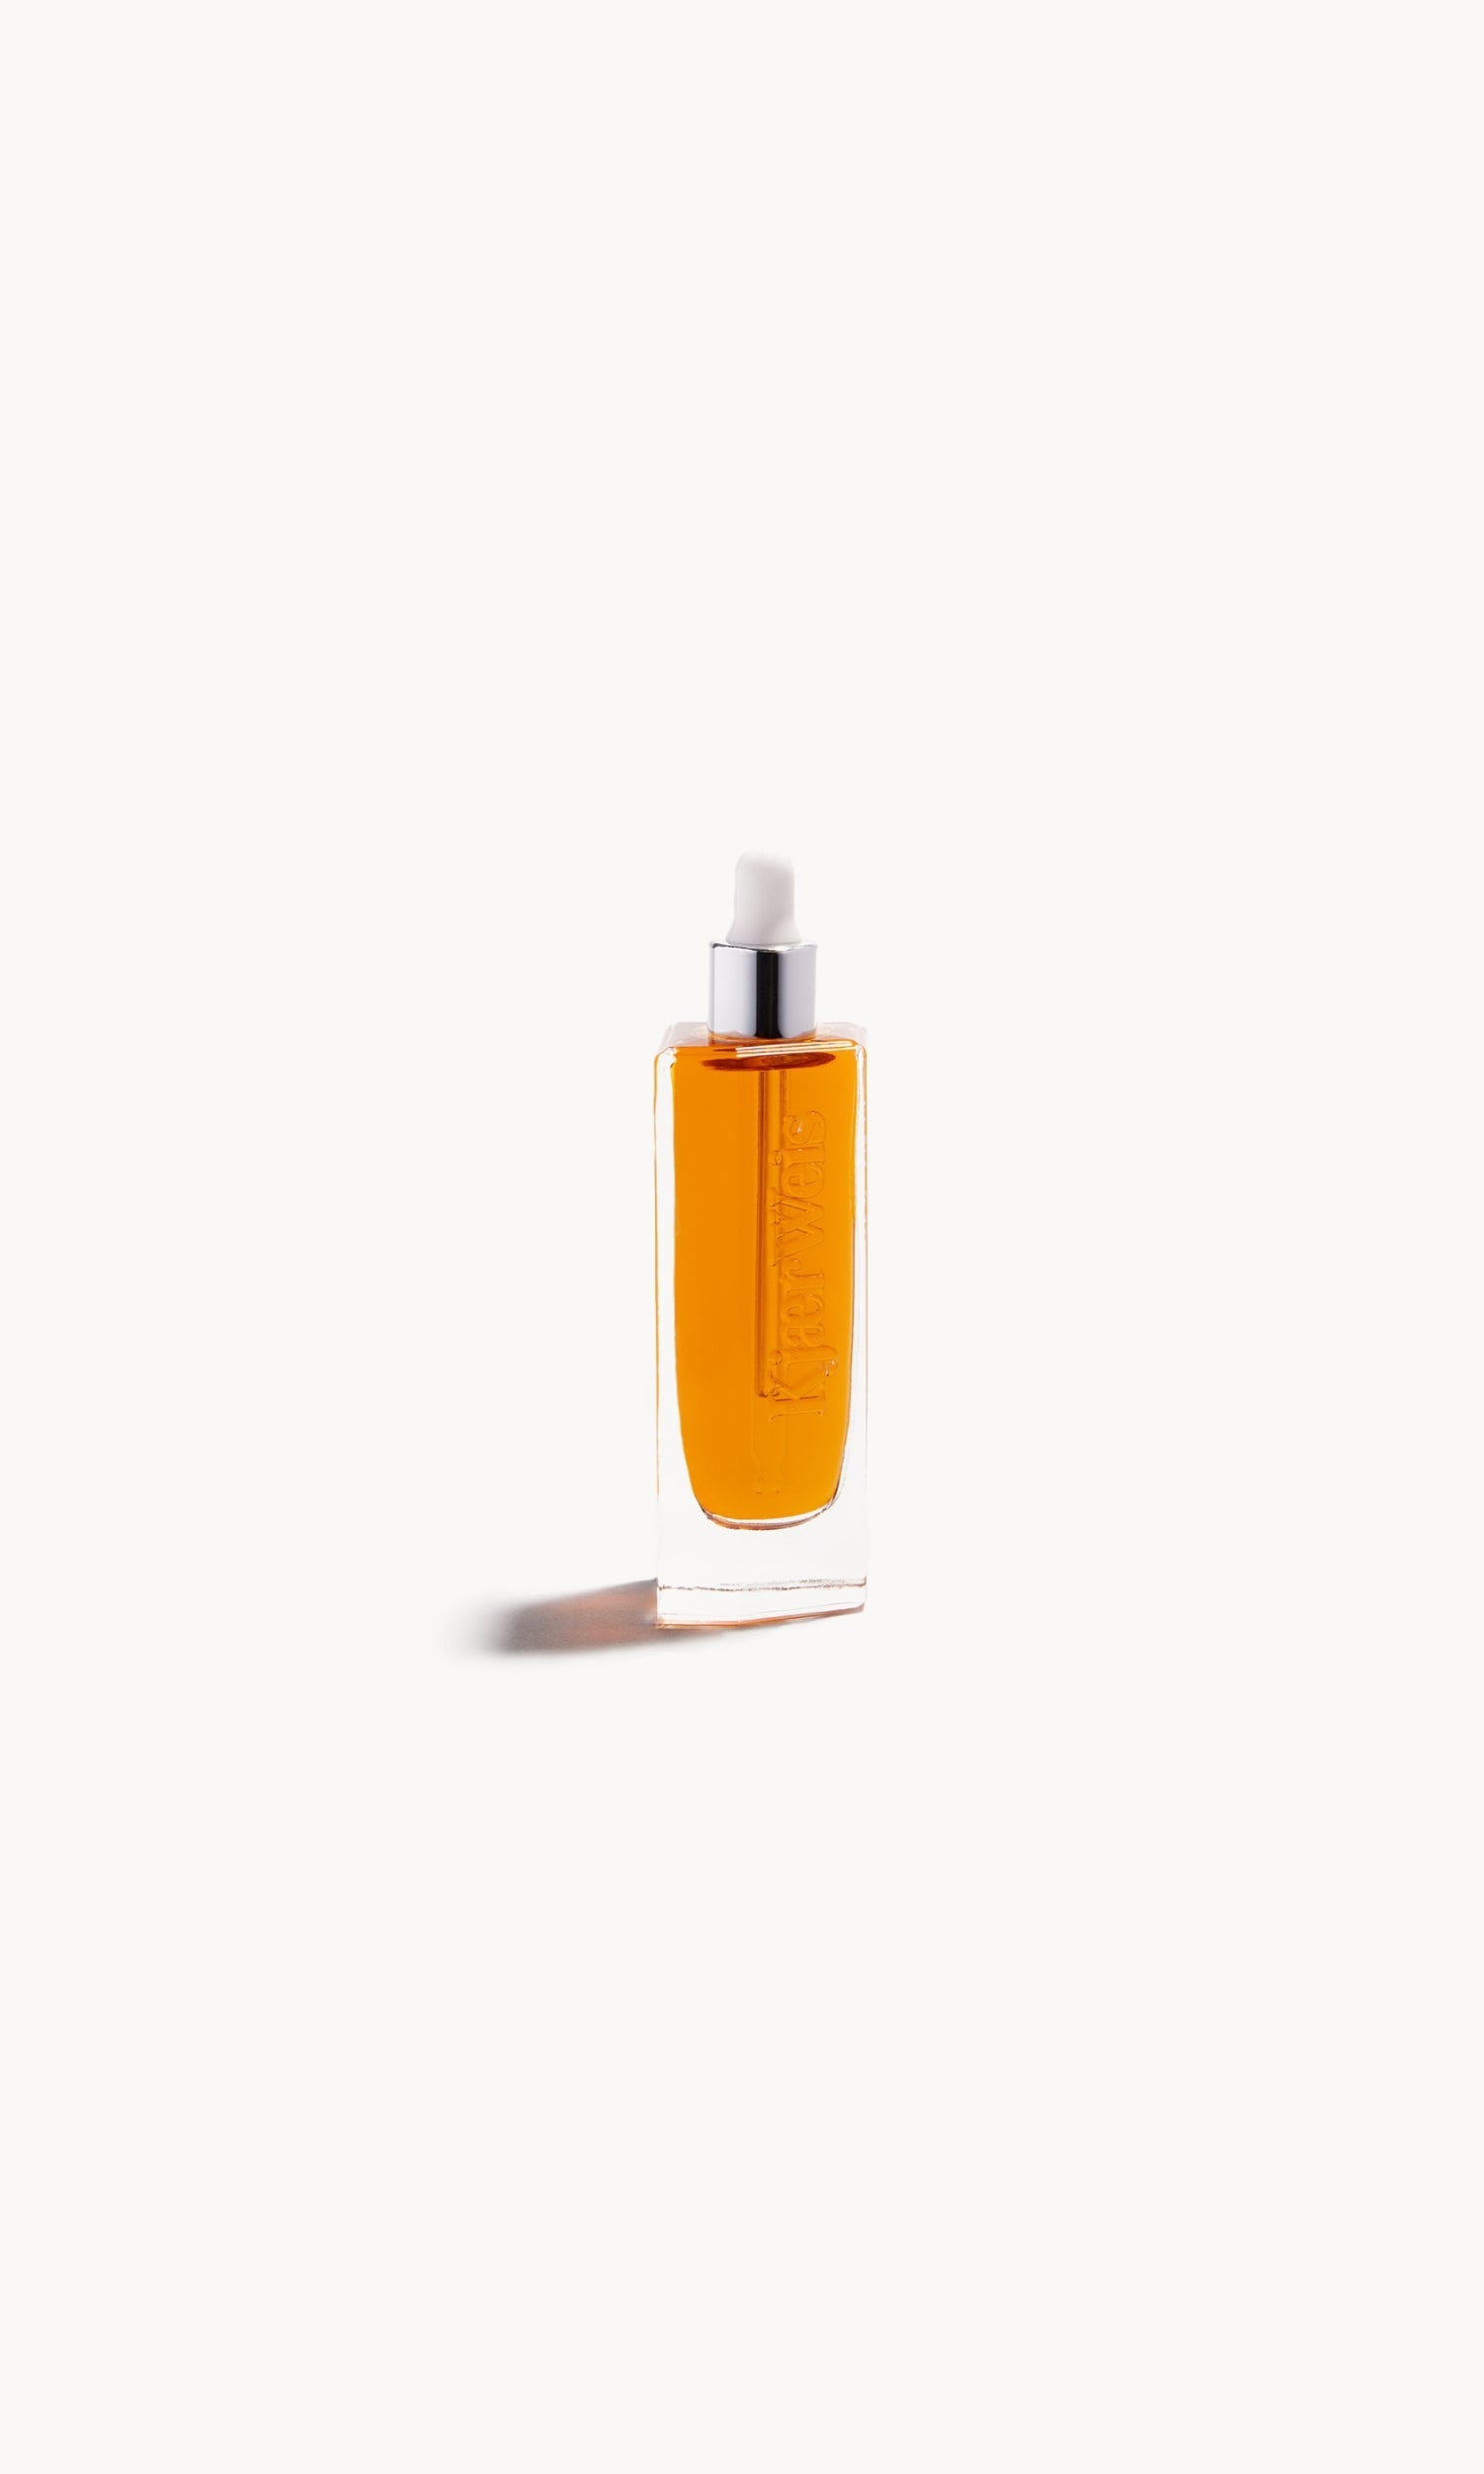 glass bottle with white pipette top and gold-coloured liquid inside on a white background